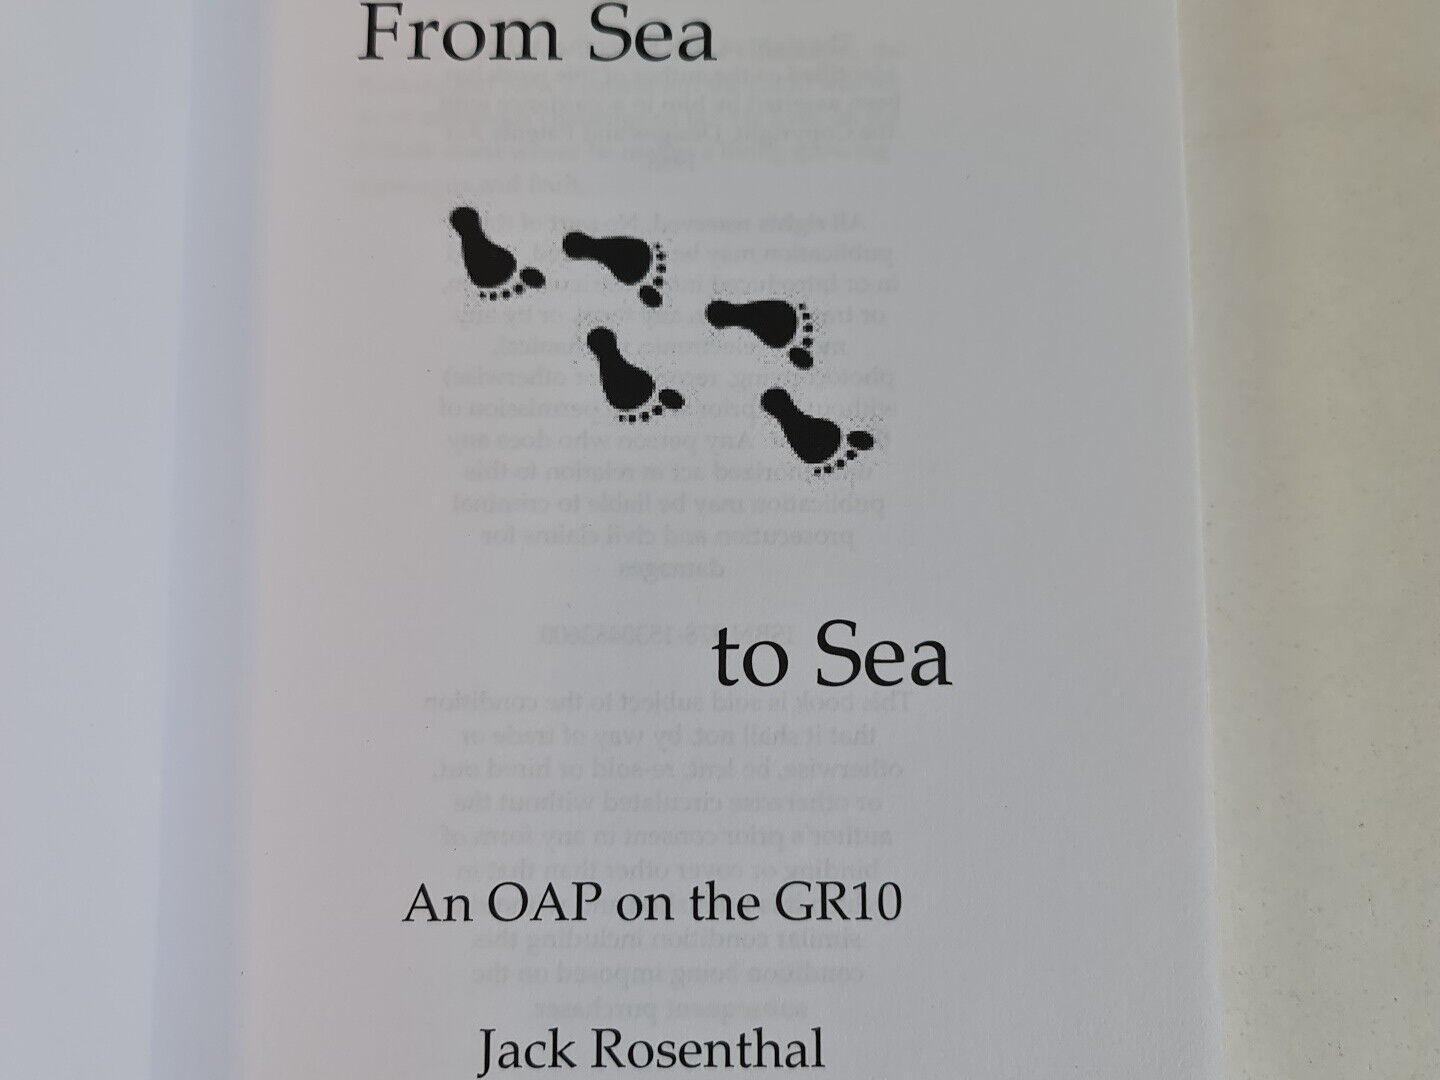 From Sea to Sea: An OAP on the GR10 by Jack Rosenthal (2016)